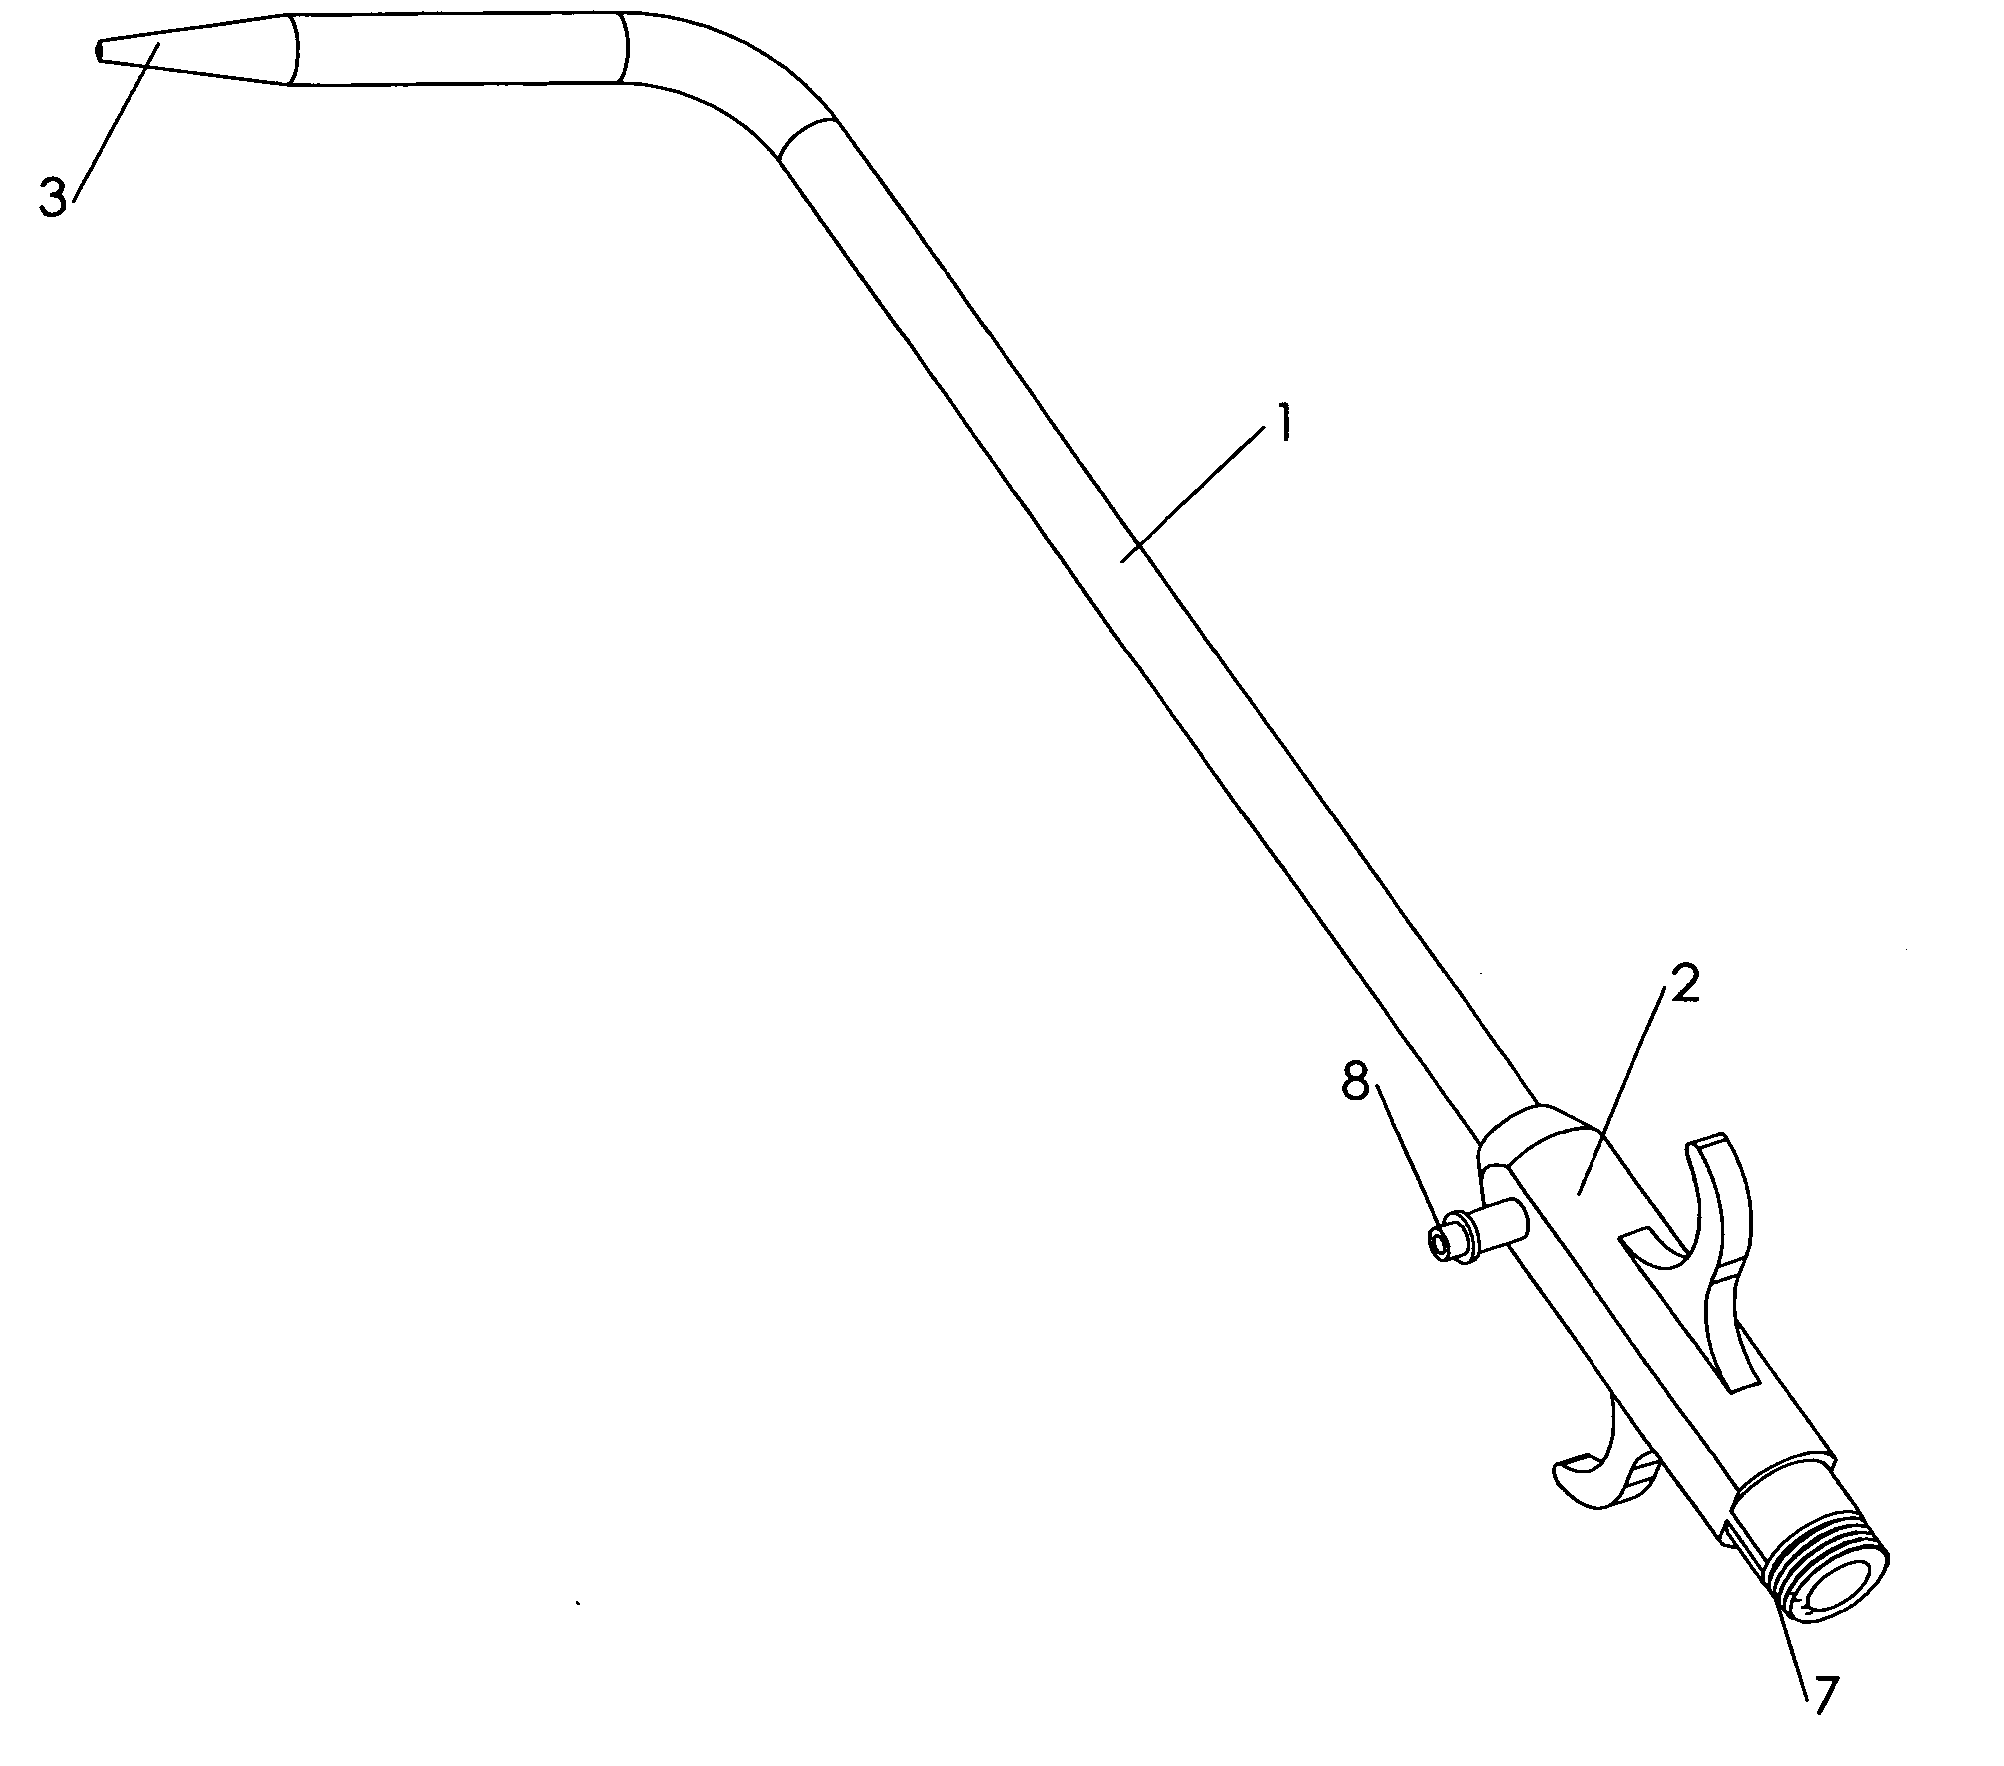 Cystotomy catheter capture device and methods of using same